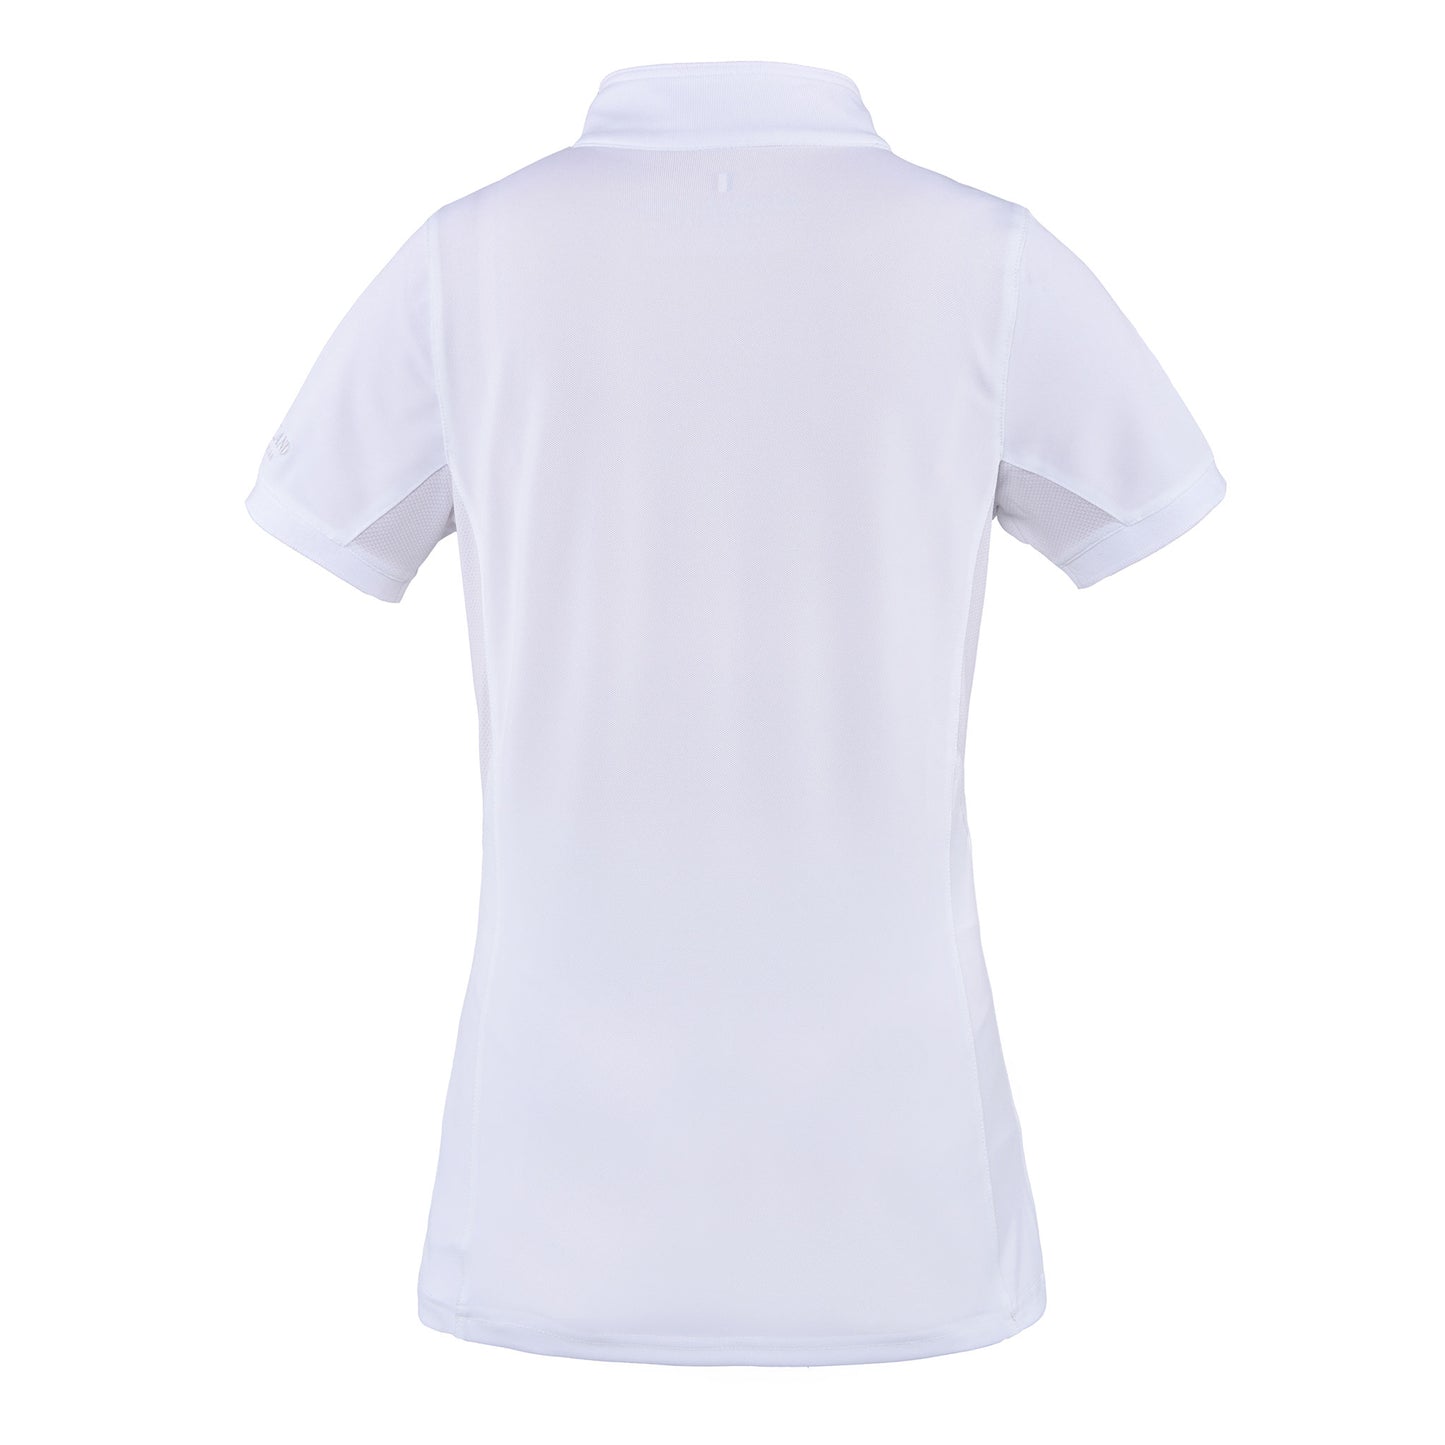 Classic Women's Short-Sleeved Show Shirt with Mesh Panels